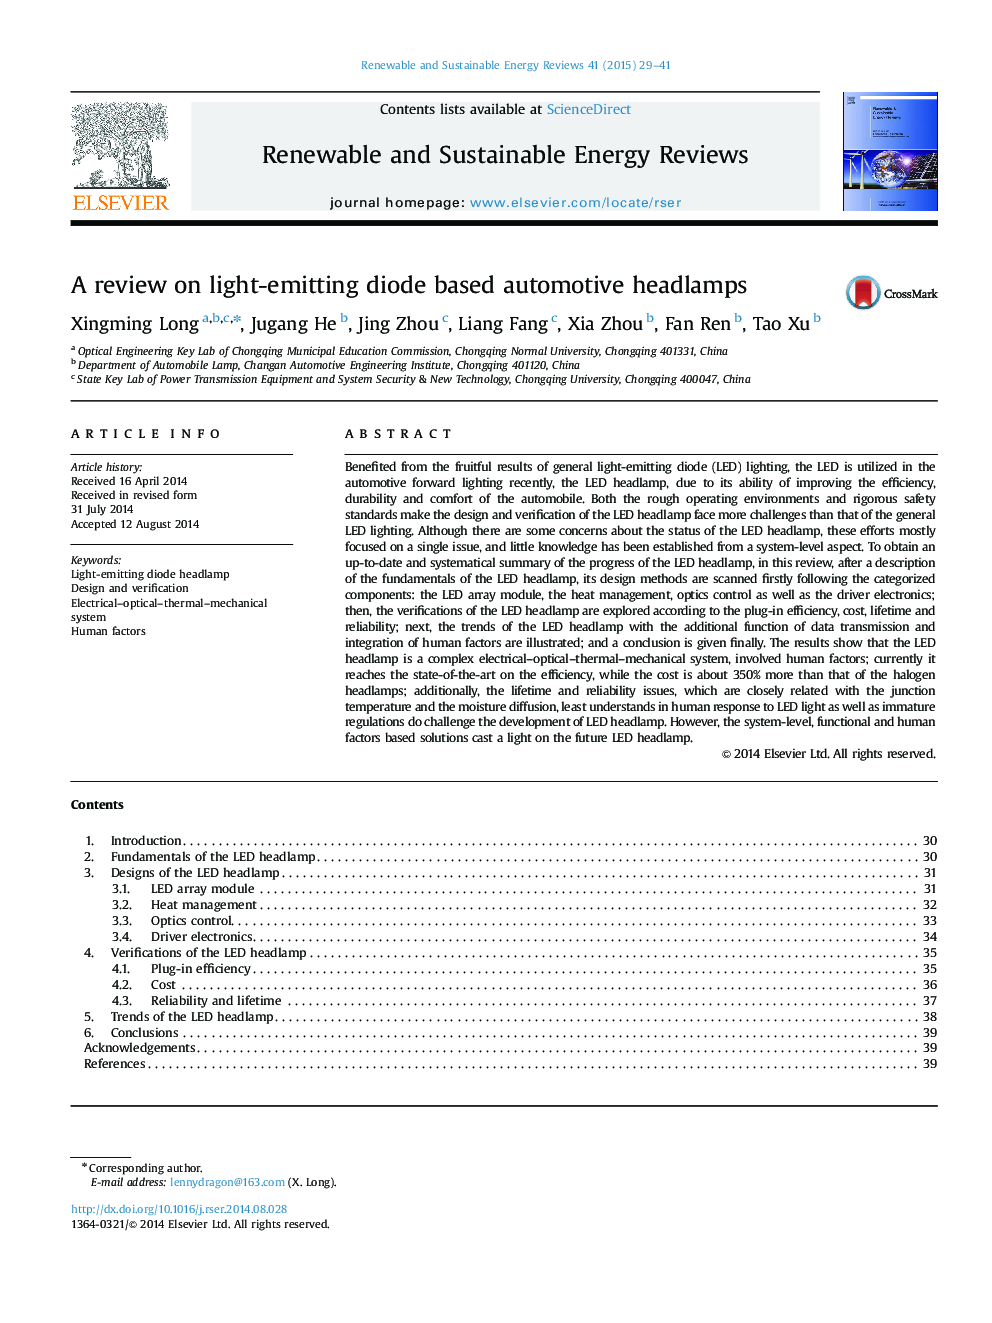 A review on light-emitting diode based automotive headlamps